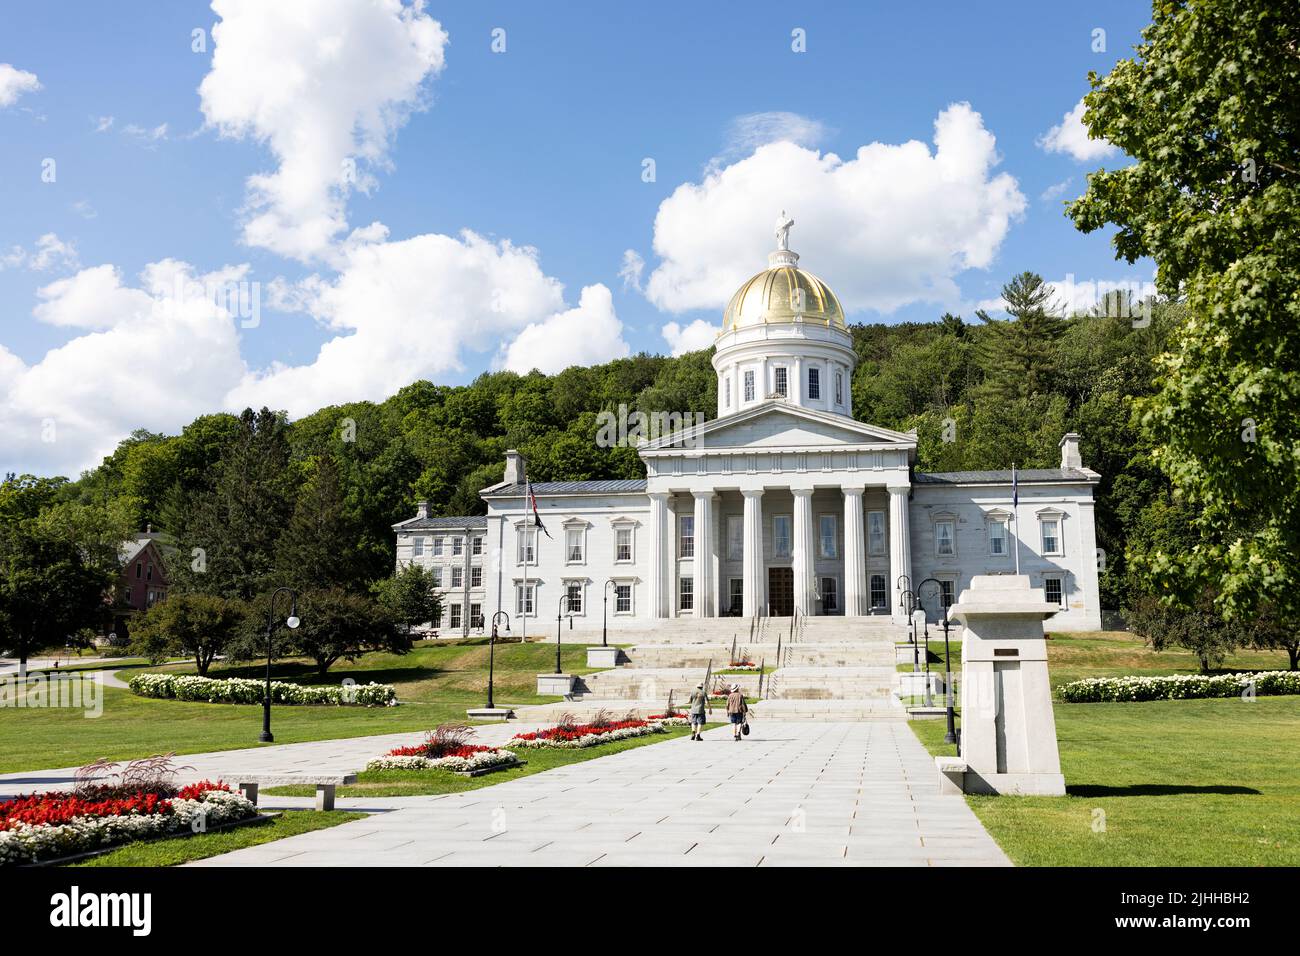 The Vermont State House capitol building on State Street in the capital of Montpelier, Vermont, USA. Stock Photo